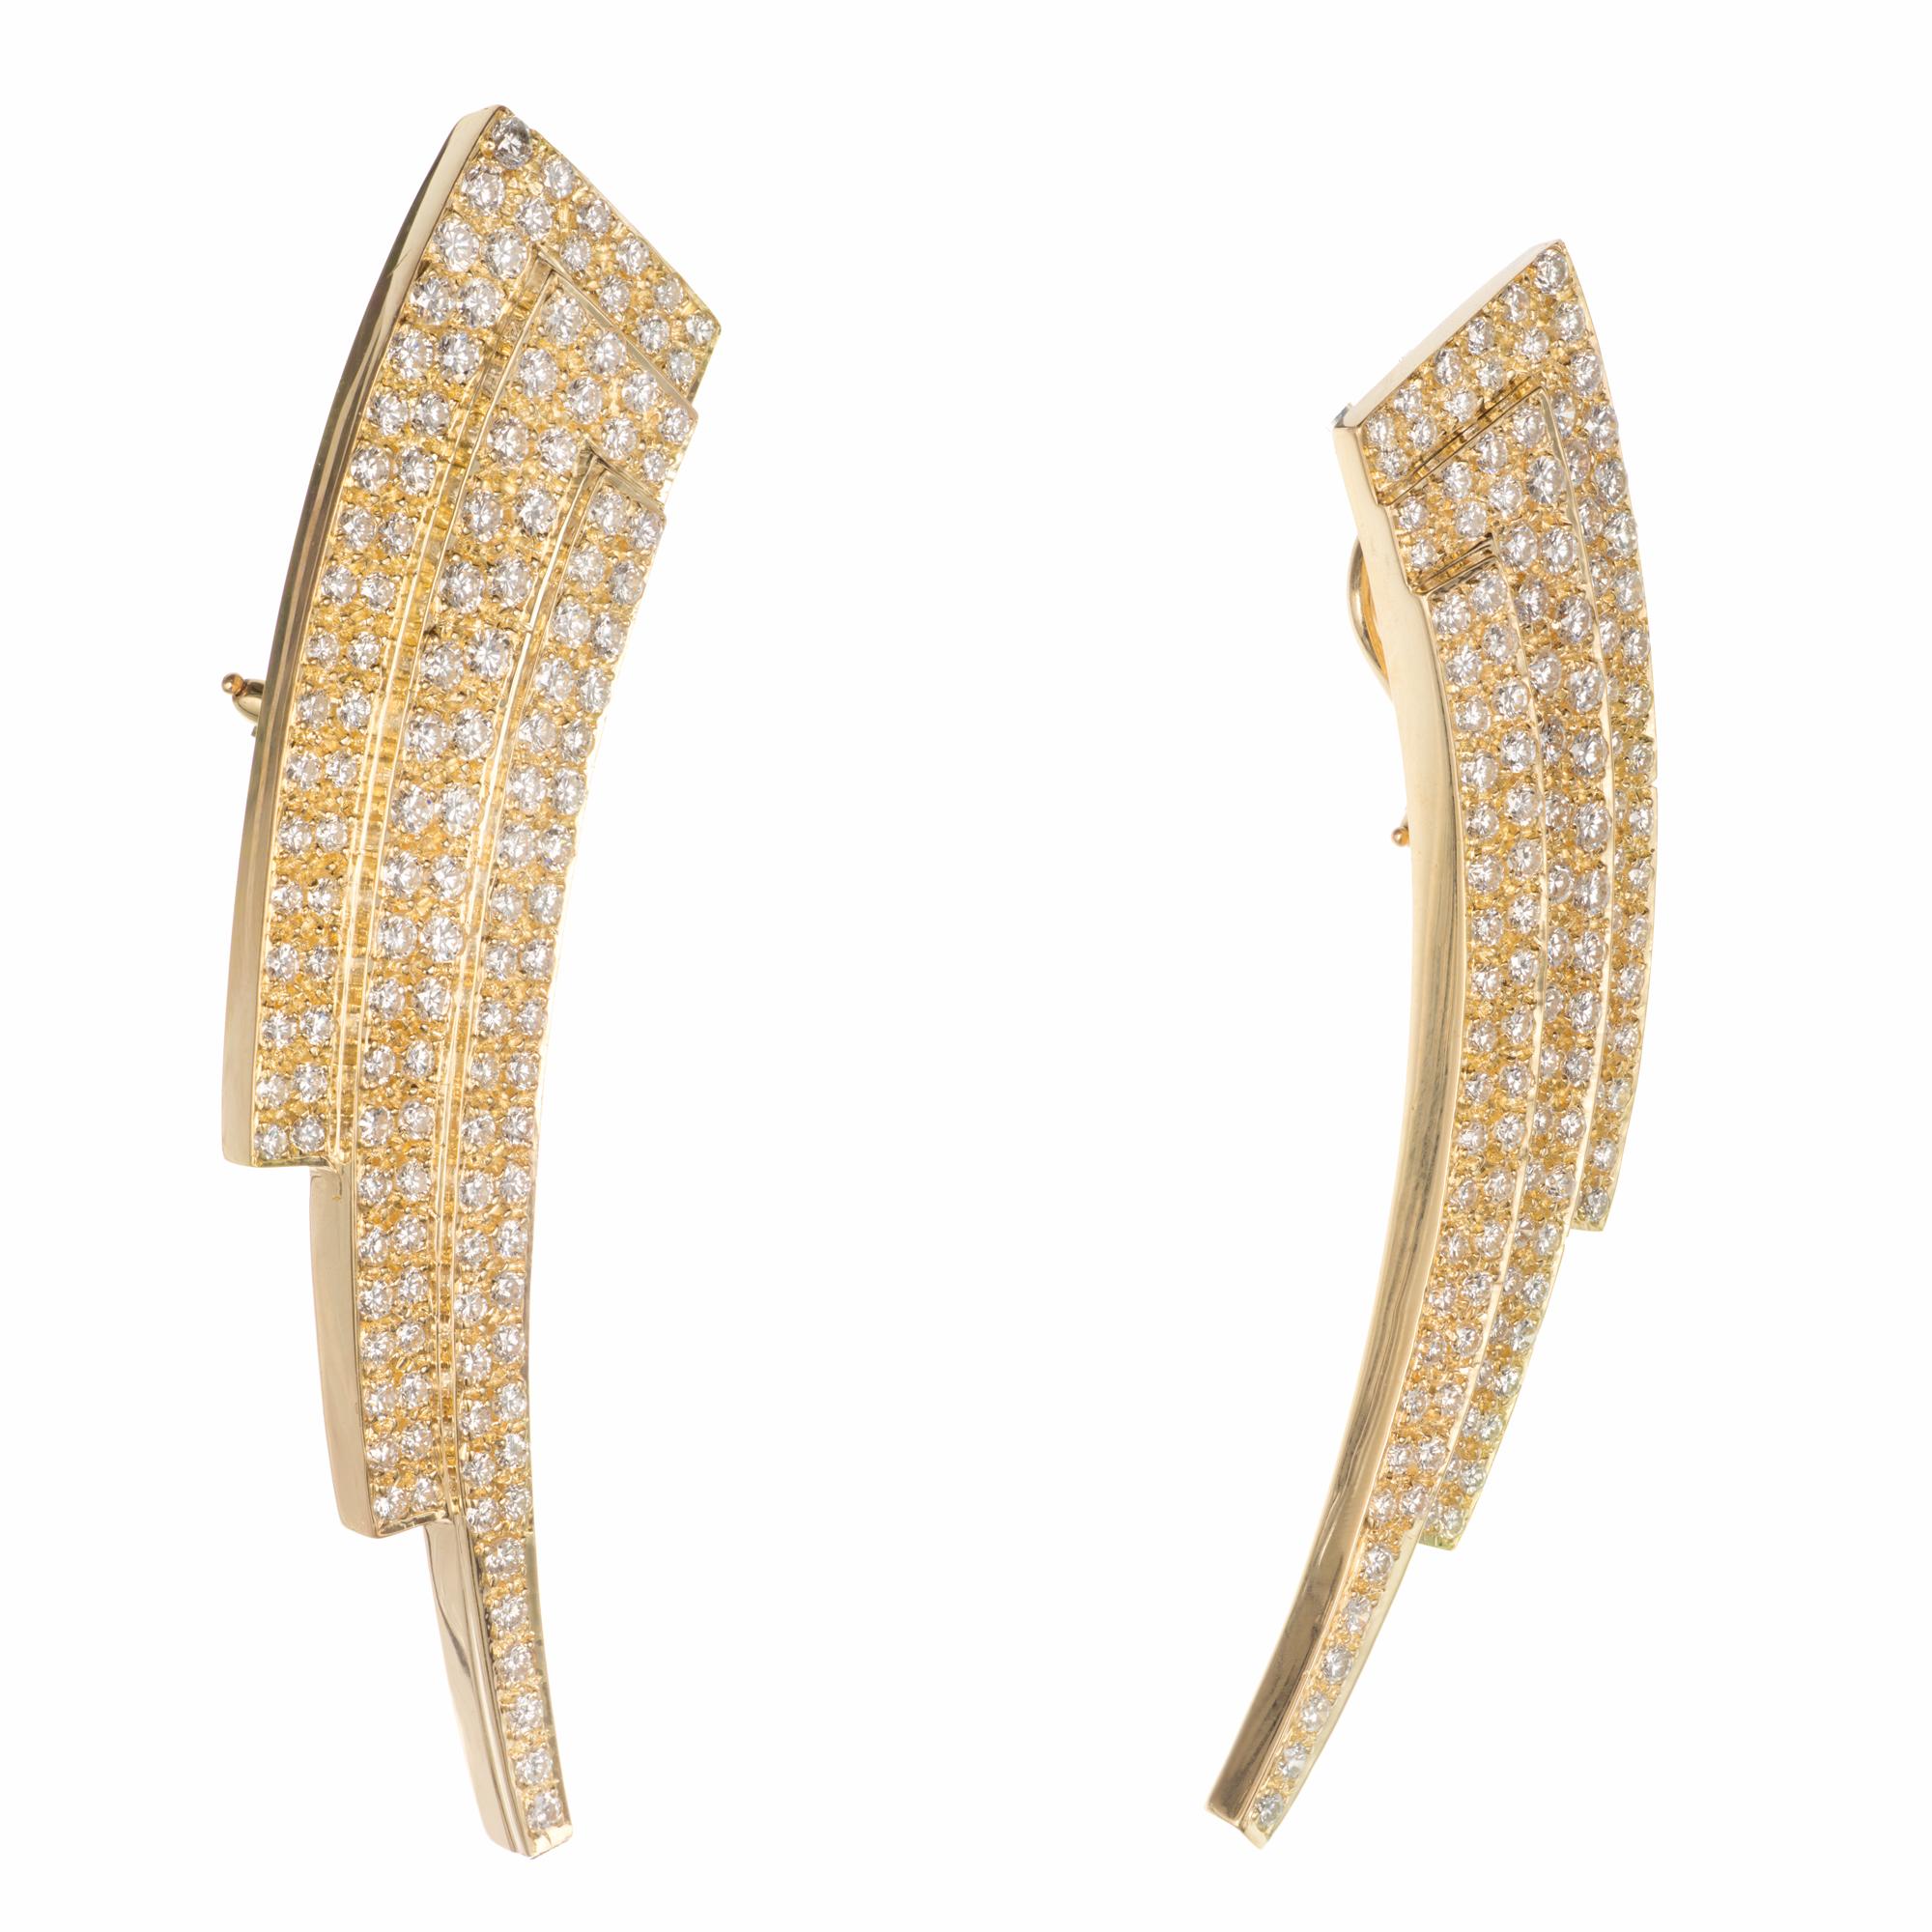 Peter Suchy bolt styled large pave diamond earrings. 5.35 carats of bright sparkly brilliant cut diamonds are pave set in 18k yellow gold clip post settings.

264 round brilliant cut G VS diamonds, Approximate 5.35cts 
18k yellow gold
Tested: